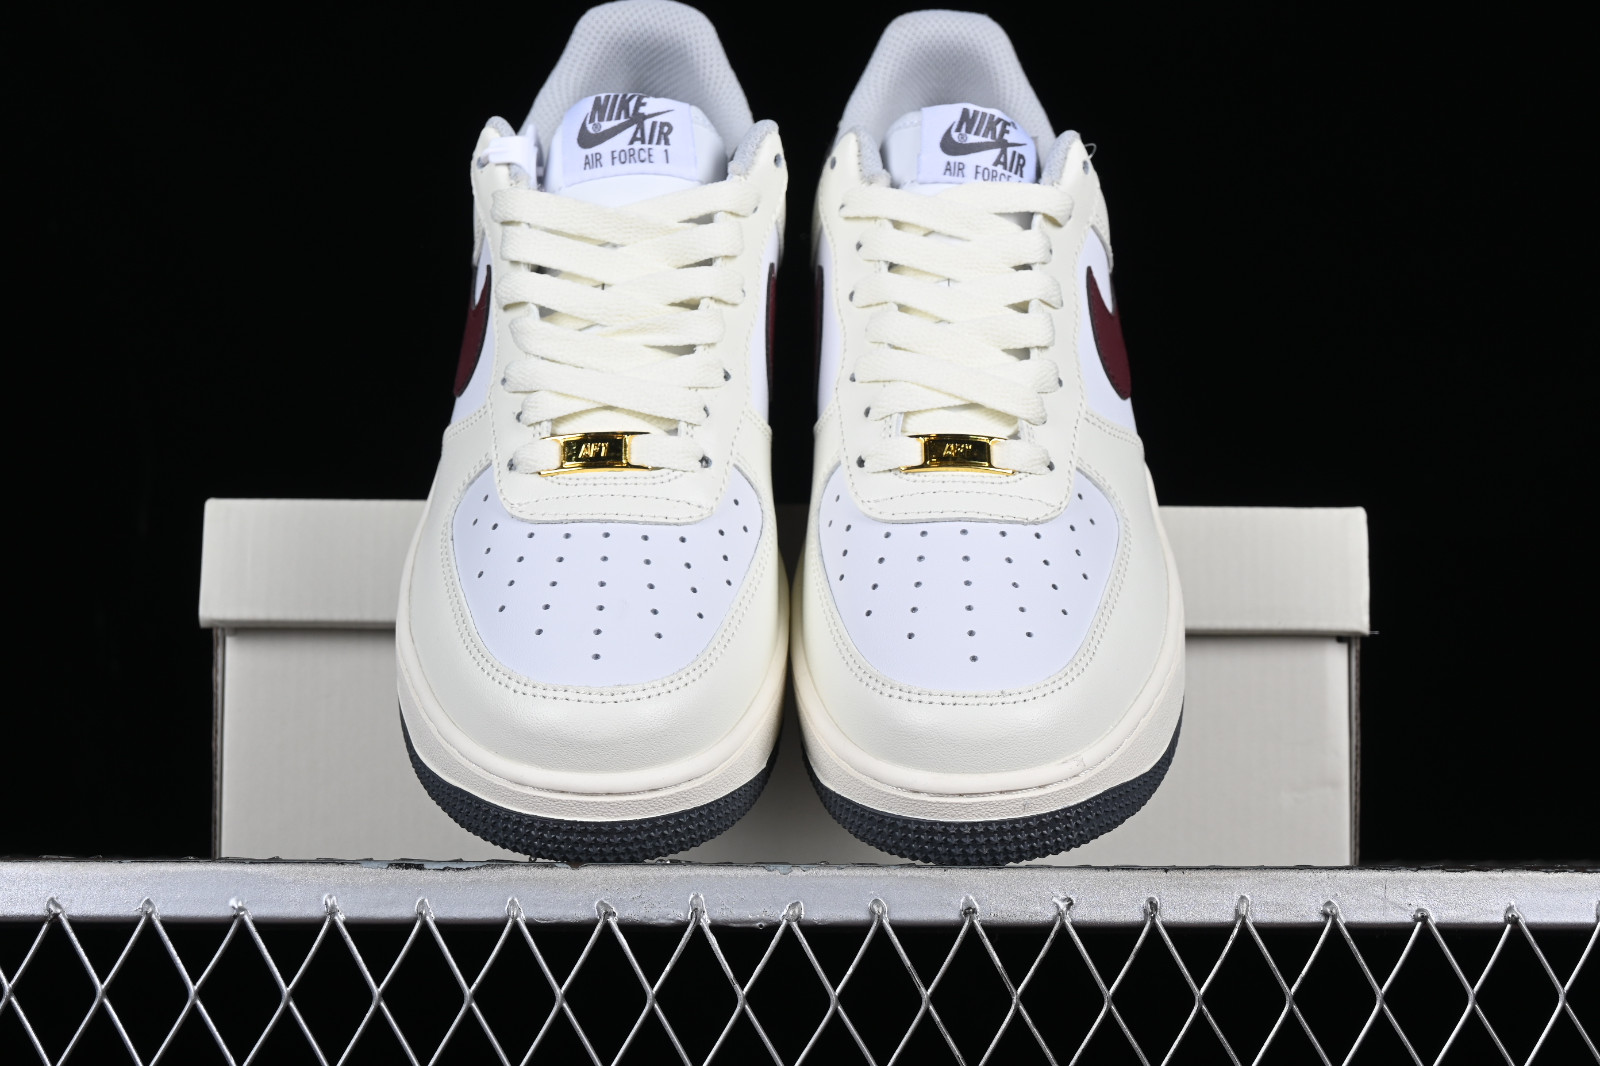 Ingenieria Fanático triple Nike Air Force high 1 07 Low Rice White Dark Red Grey HH2322 - 022 -  MultiscaleconsultingShops - nike air ring leader low zappos women boots  shoes